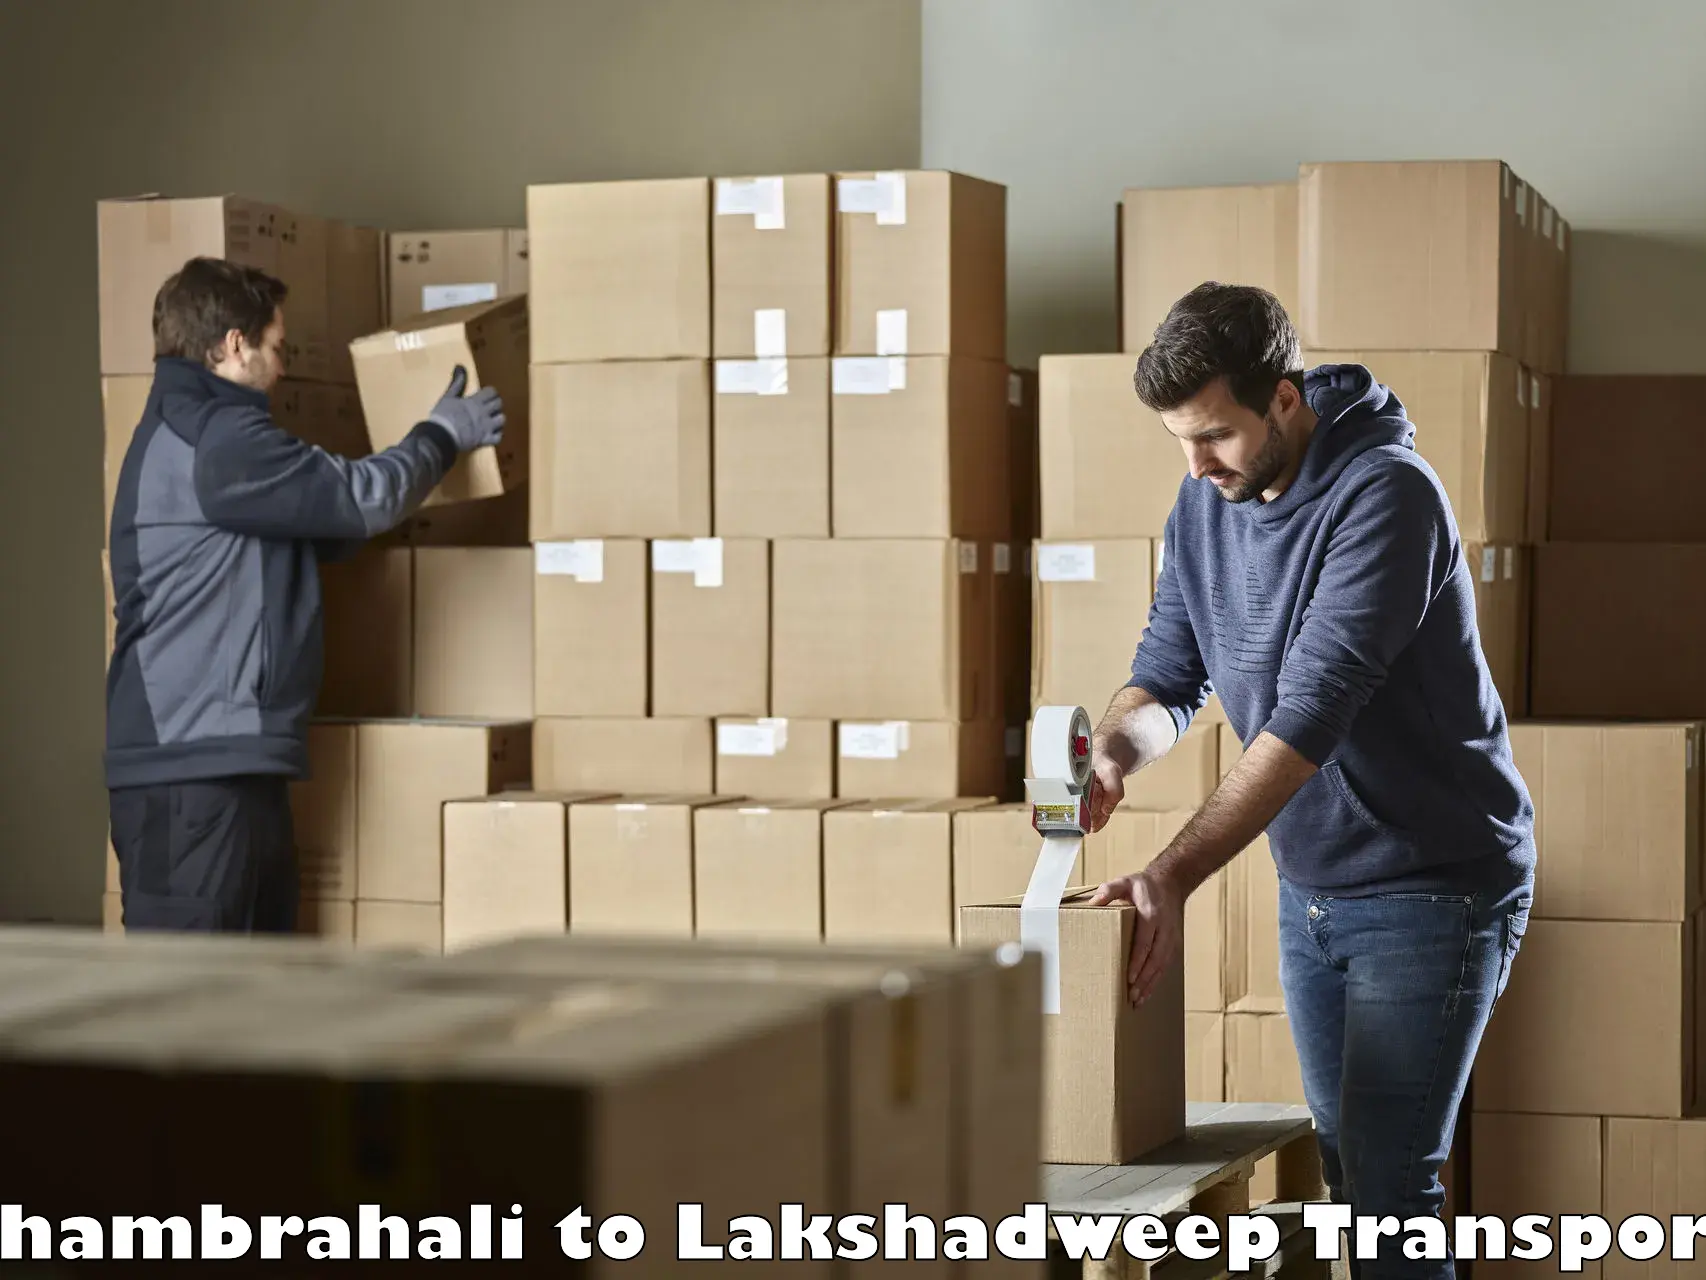 Road transport online services Thambrahali to Lakshadweep